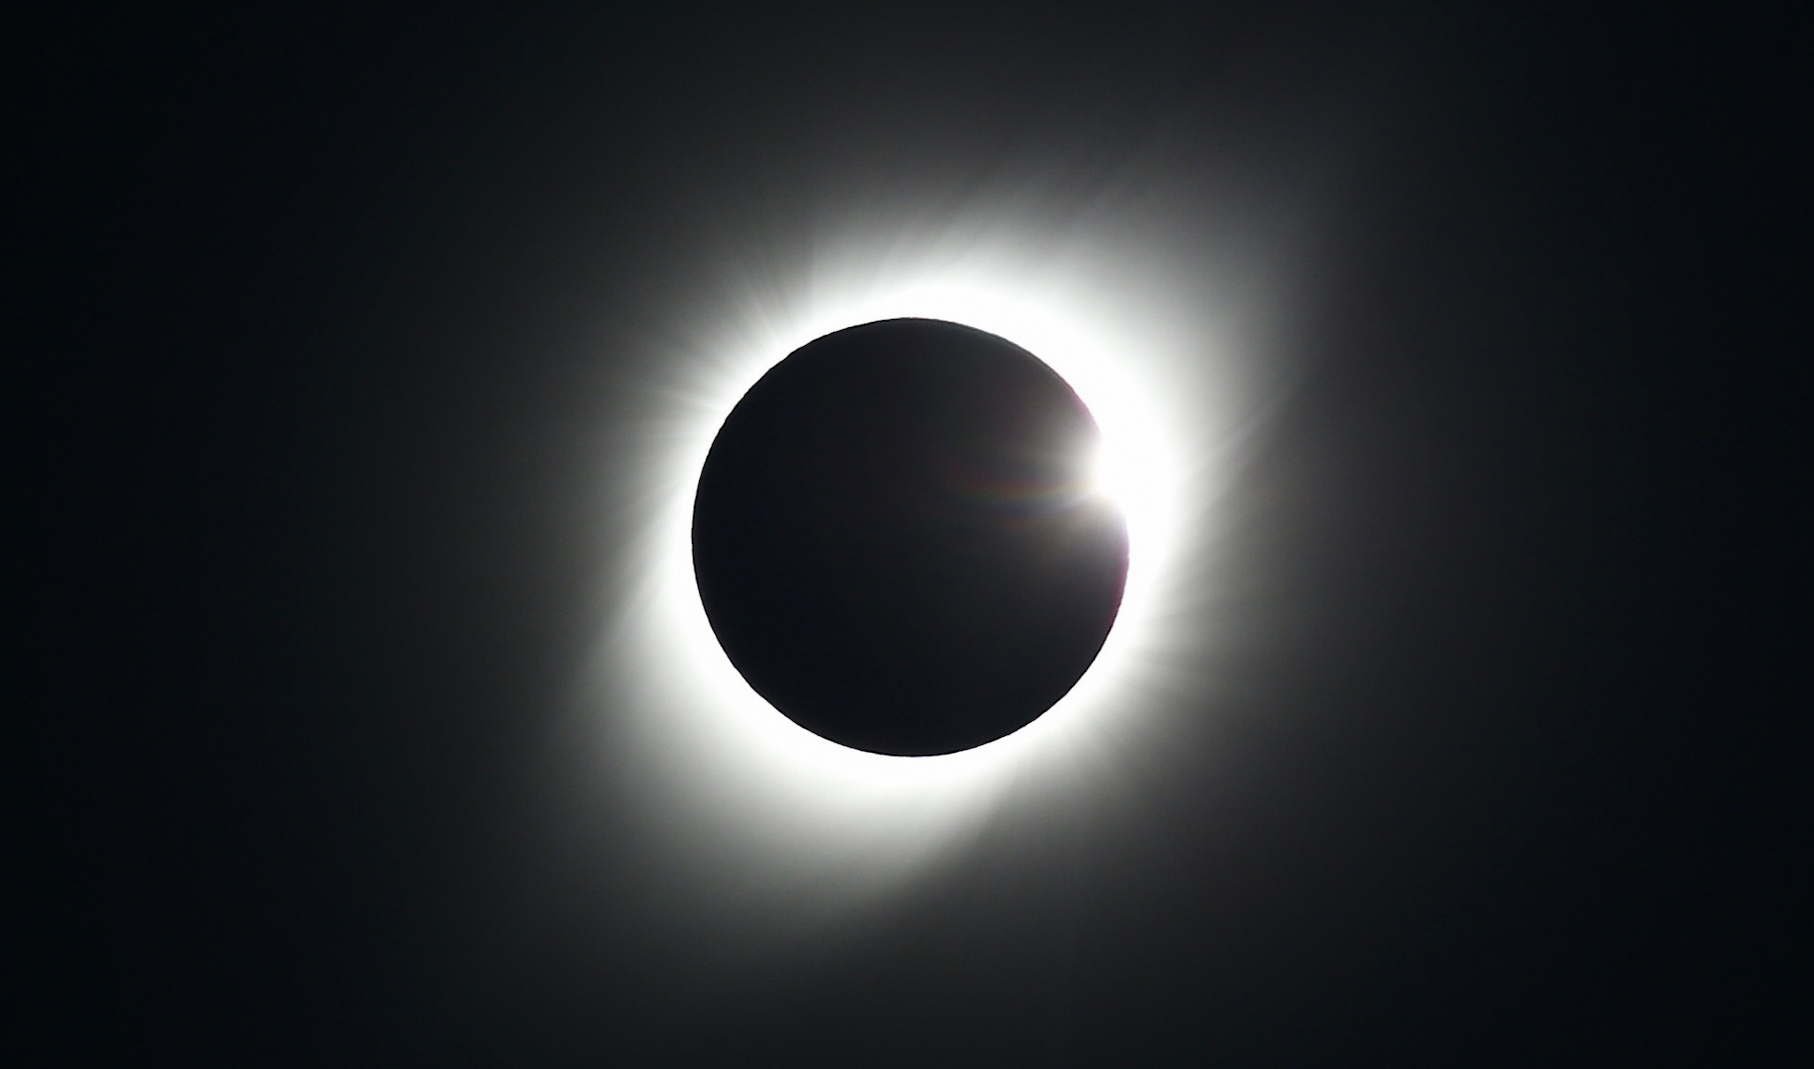 Chileans, Argentines Gape at Total Solar Eclipse in Rare, Irresistible Event